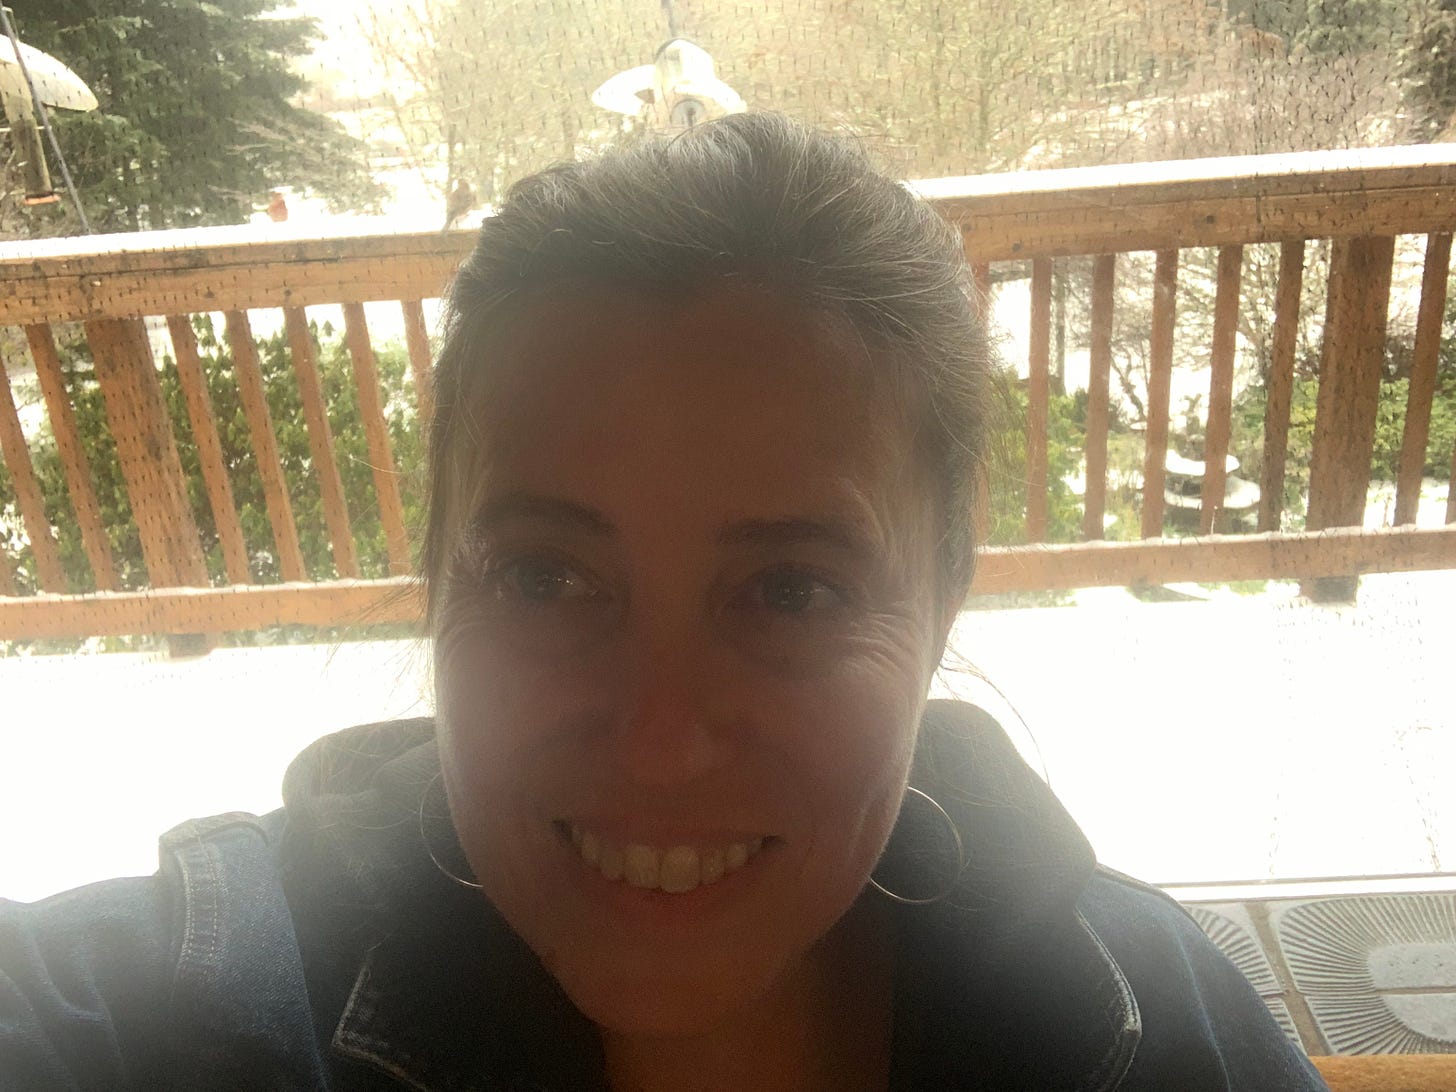 A woman smiles. Behind her is an ice-covered porch and you can just make out birds and a feeder.